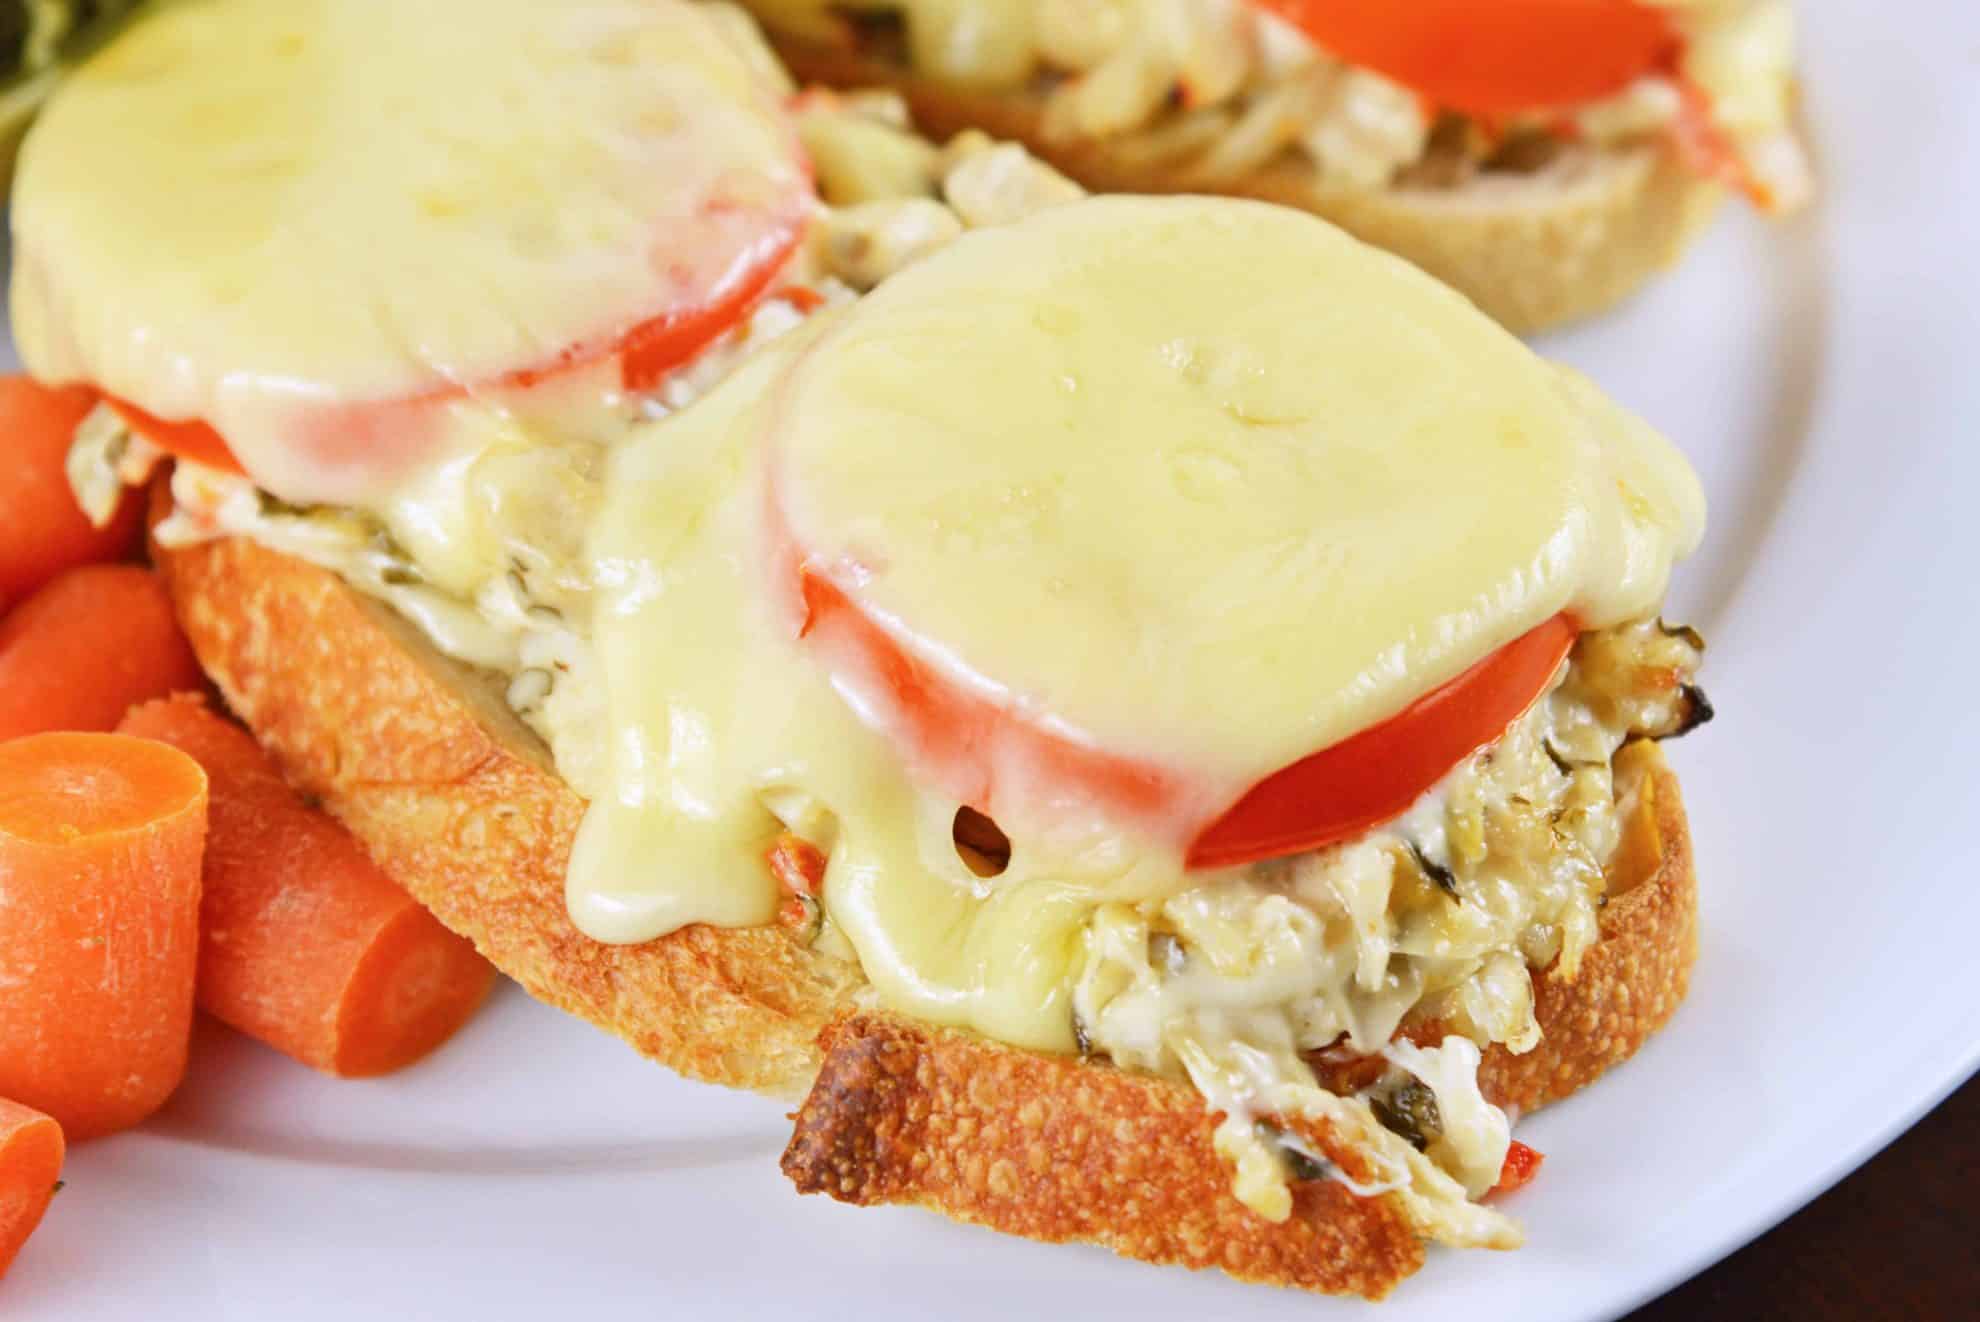 This Crab Melt will become your favorite open faced sandwich recipe! Deliciously cheesy and easy to make! #crabmelt #crabrecipes #openfacedsandwich www.savoryexperiments.com